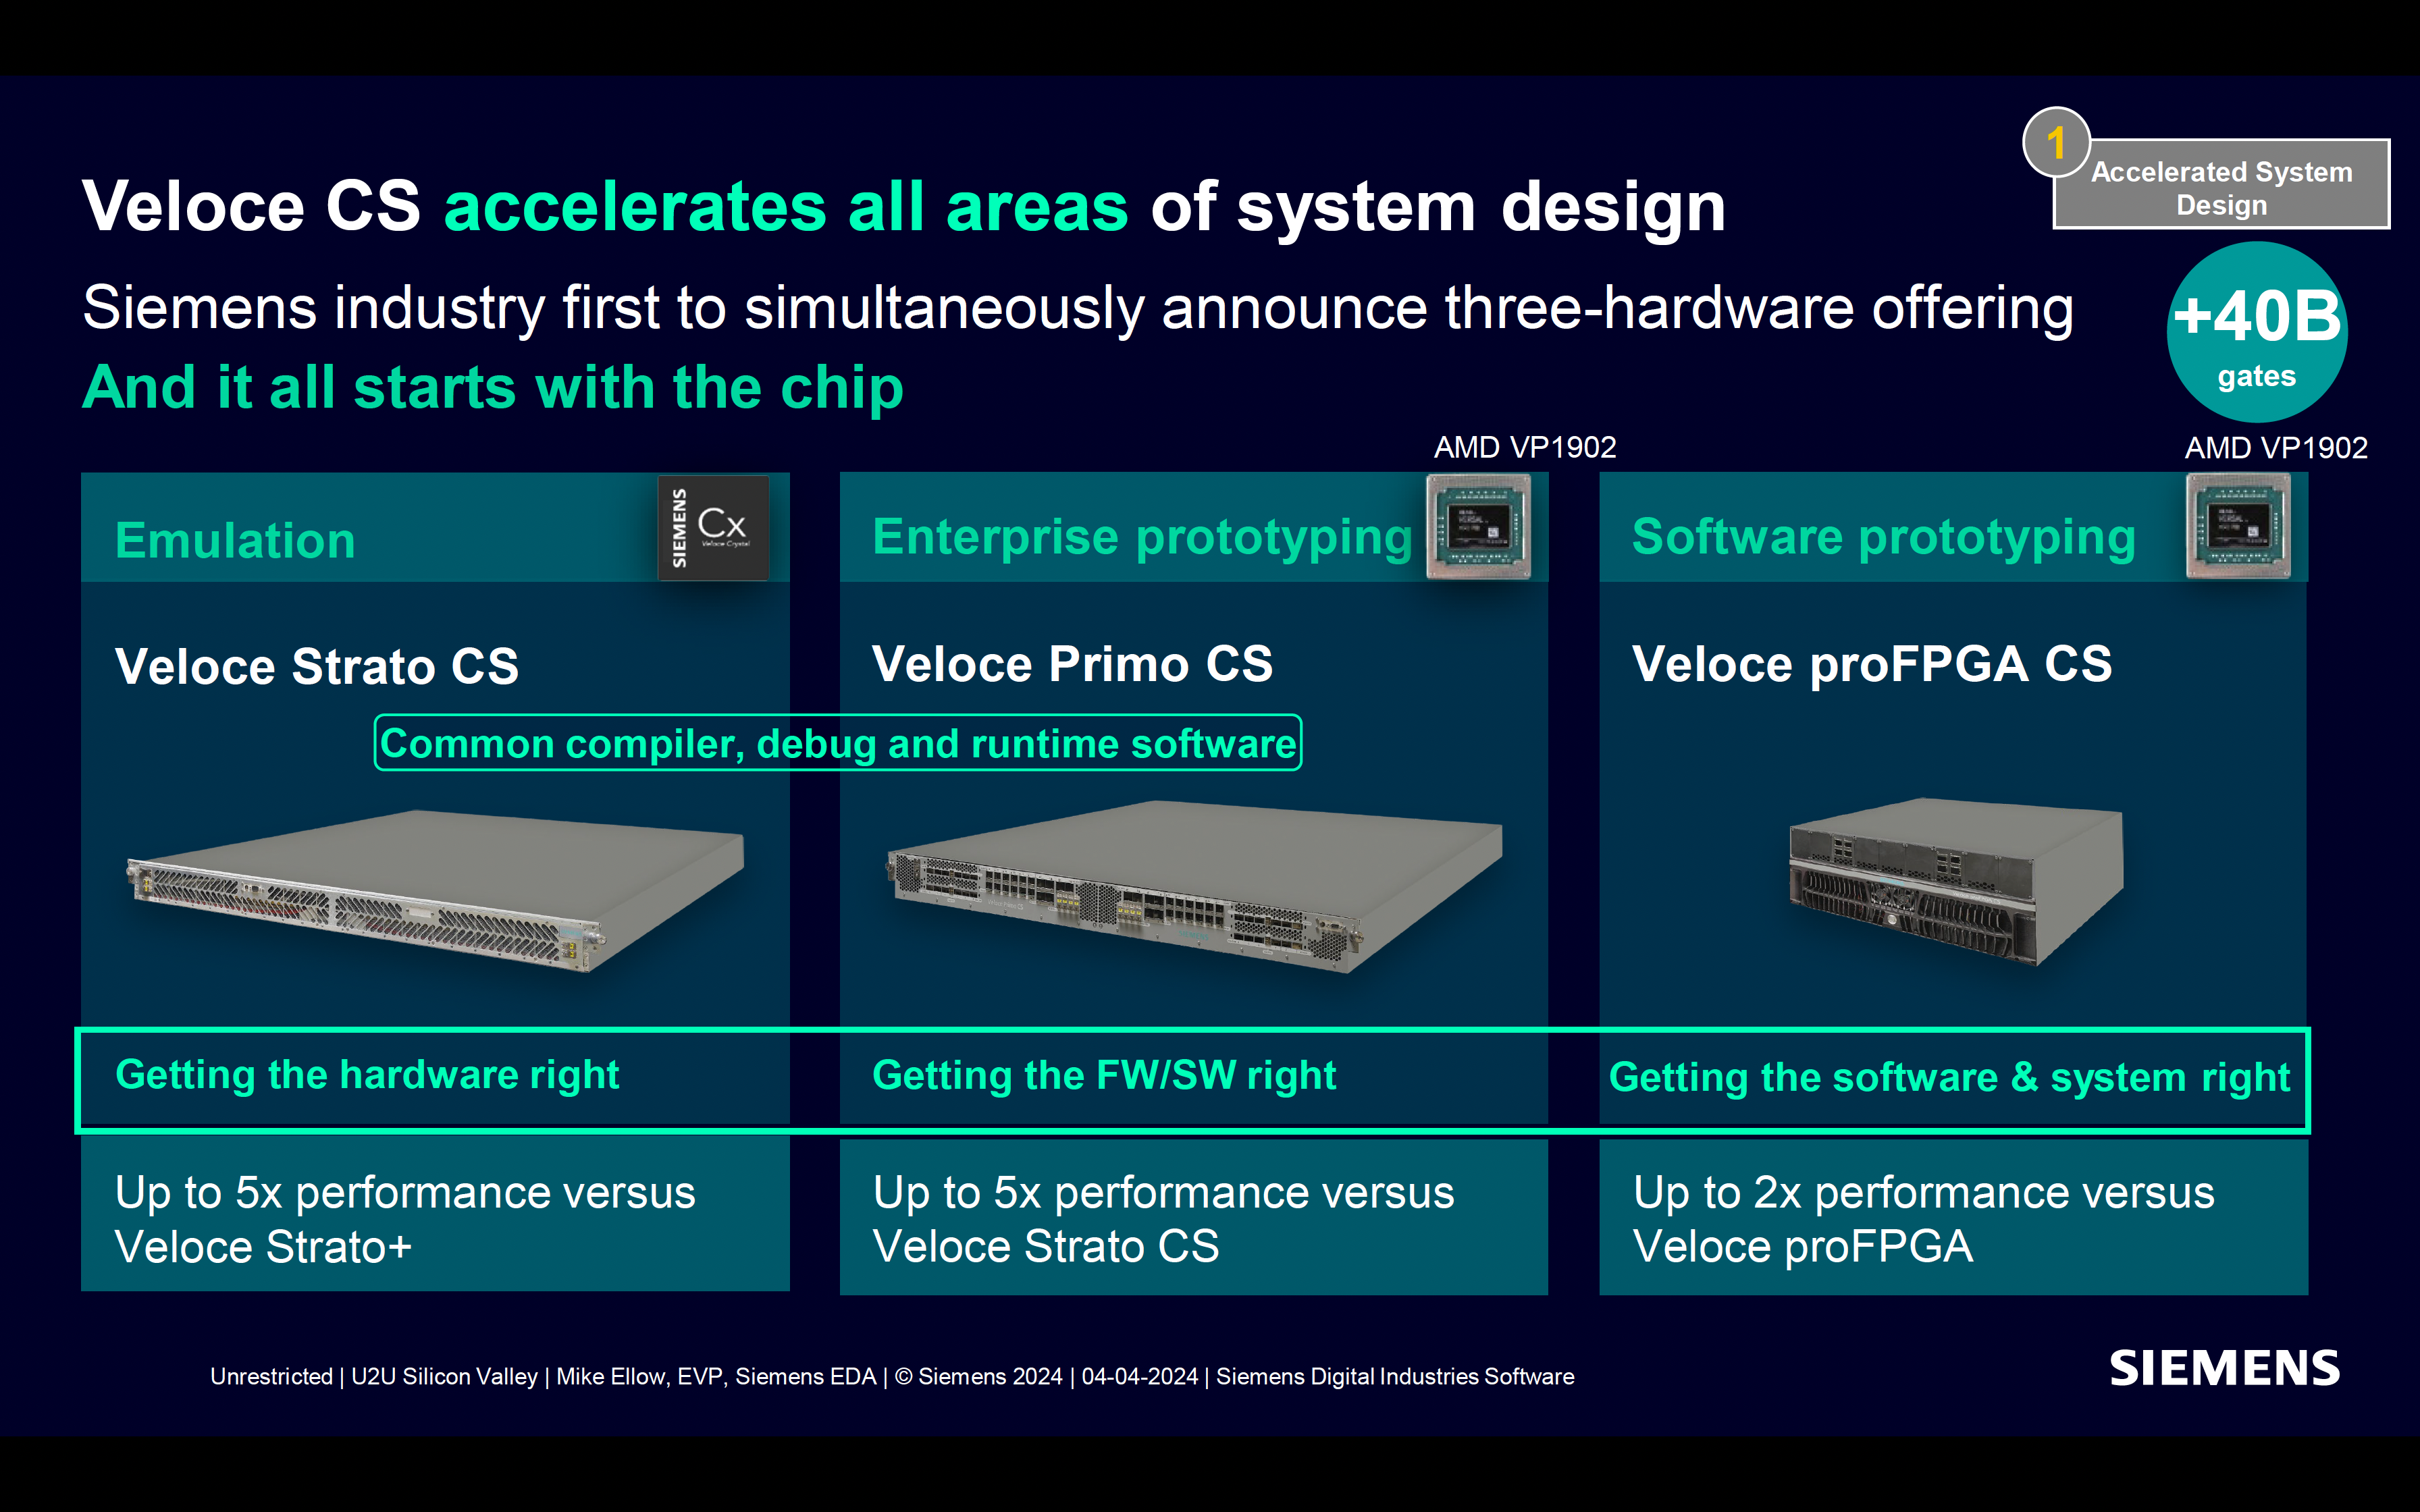 Veloce CS Accelerates All Areas of System Design